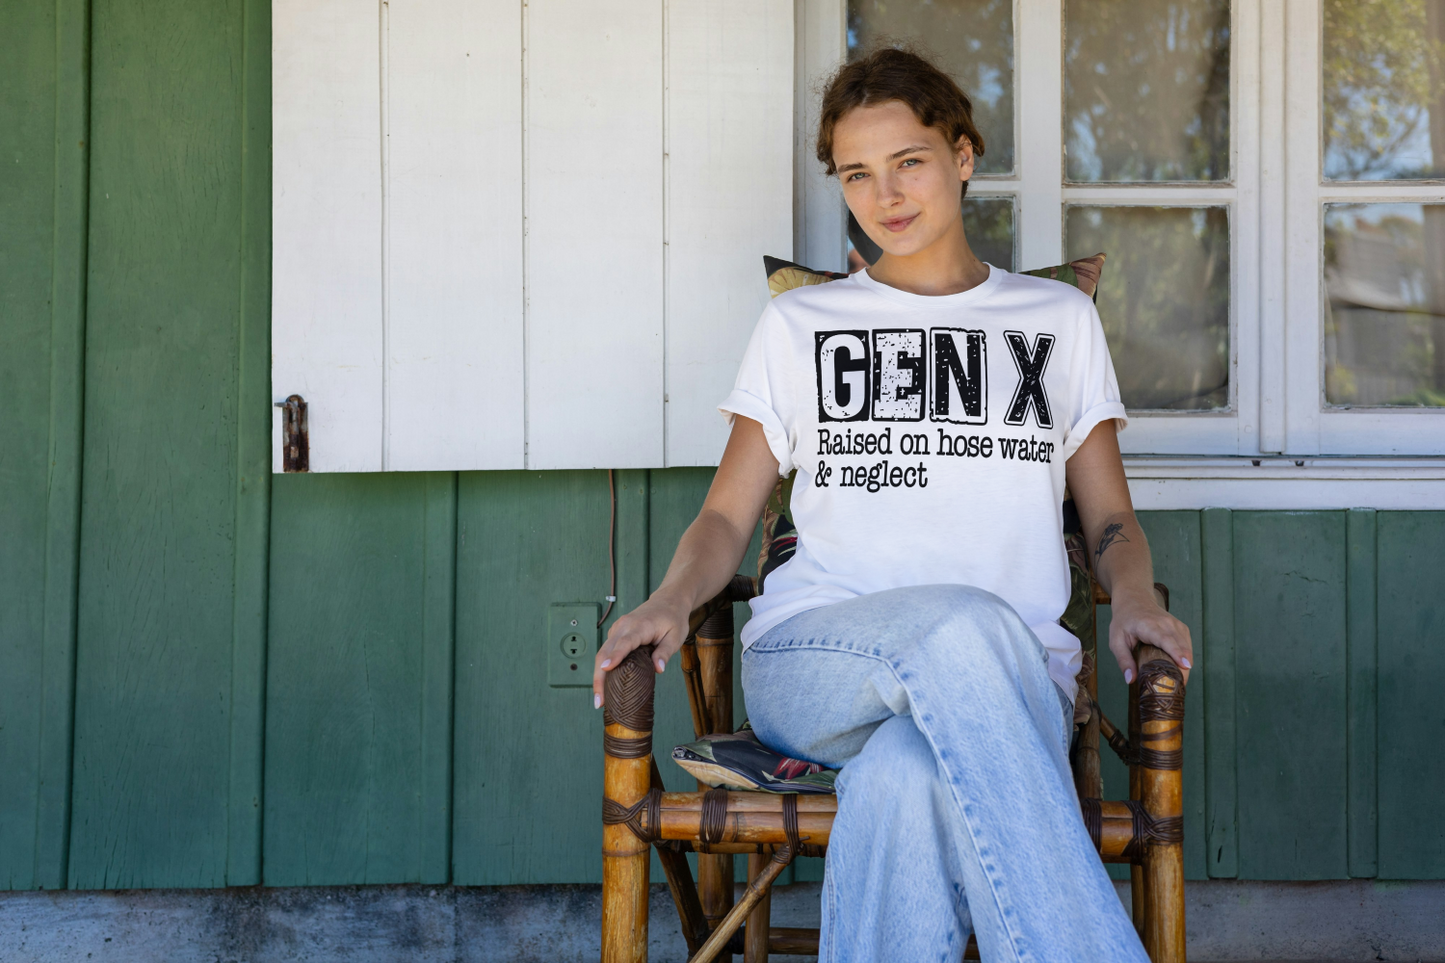 Gen X Raised on Hose Water and Neglect t-shirt for women. Enjoy wearing this comfortable and classic style tee. Shop SmithRidge.farm for #JustForFun collection.